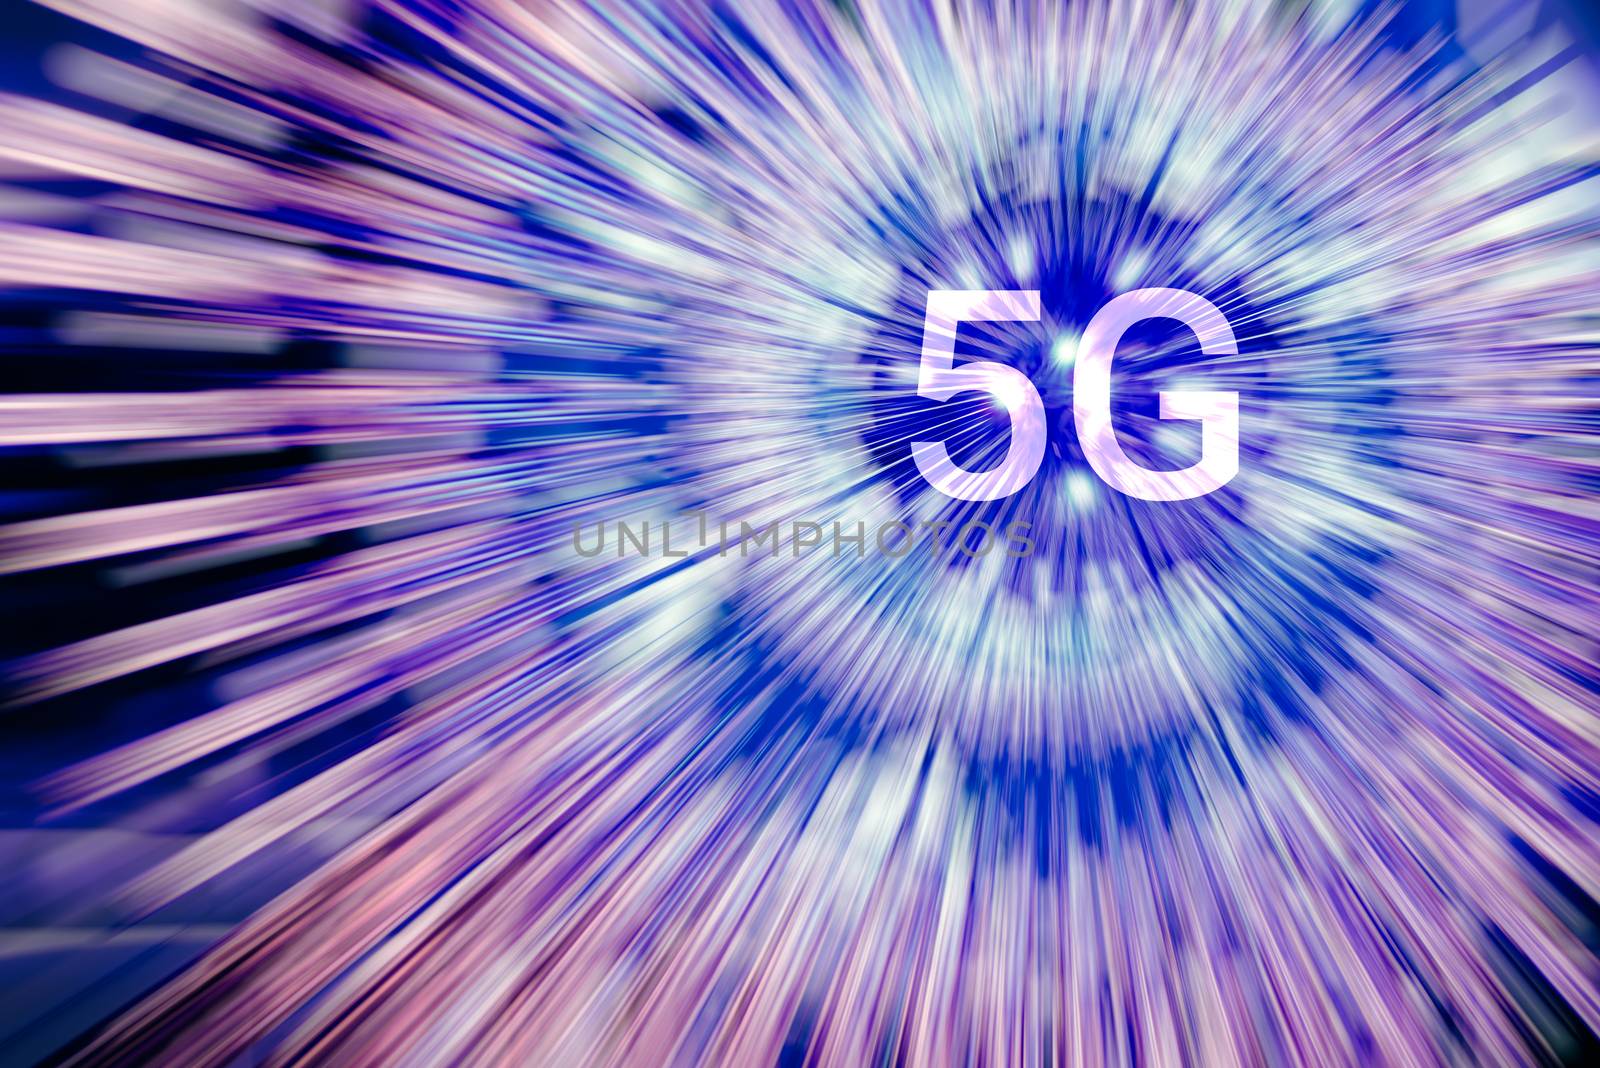 5G on a neon light radial lines background by LP2Studio